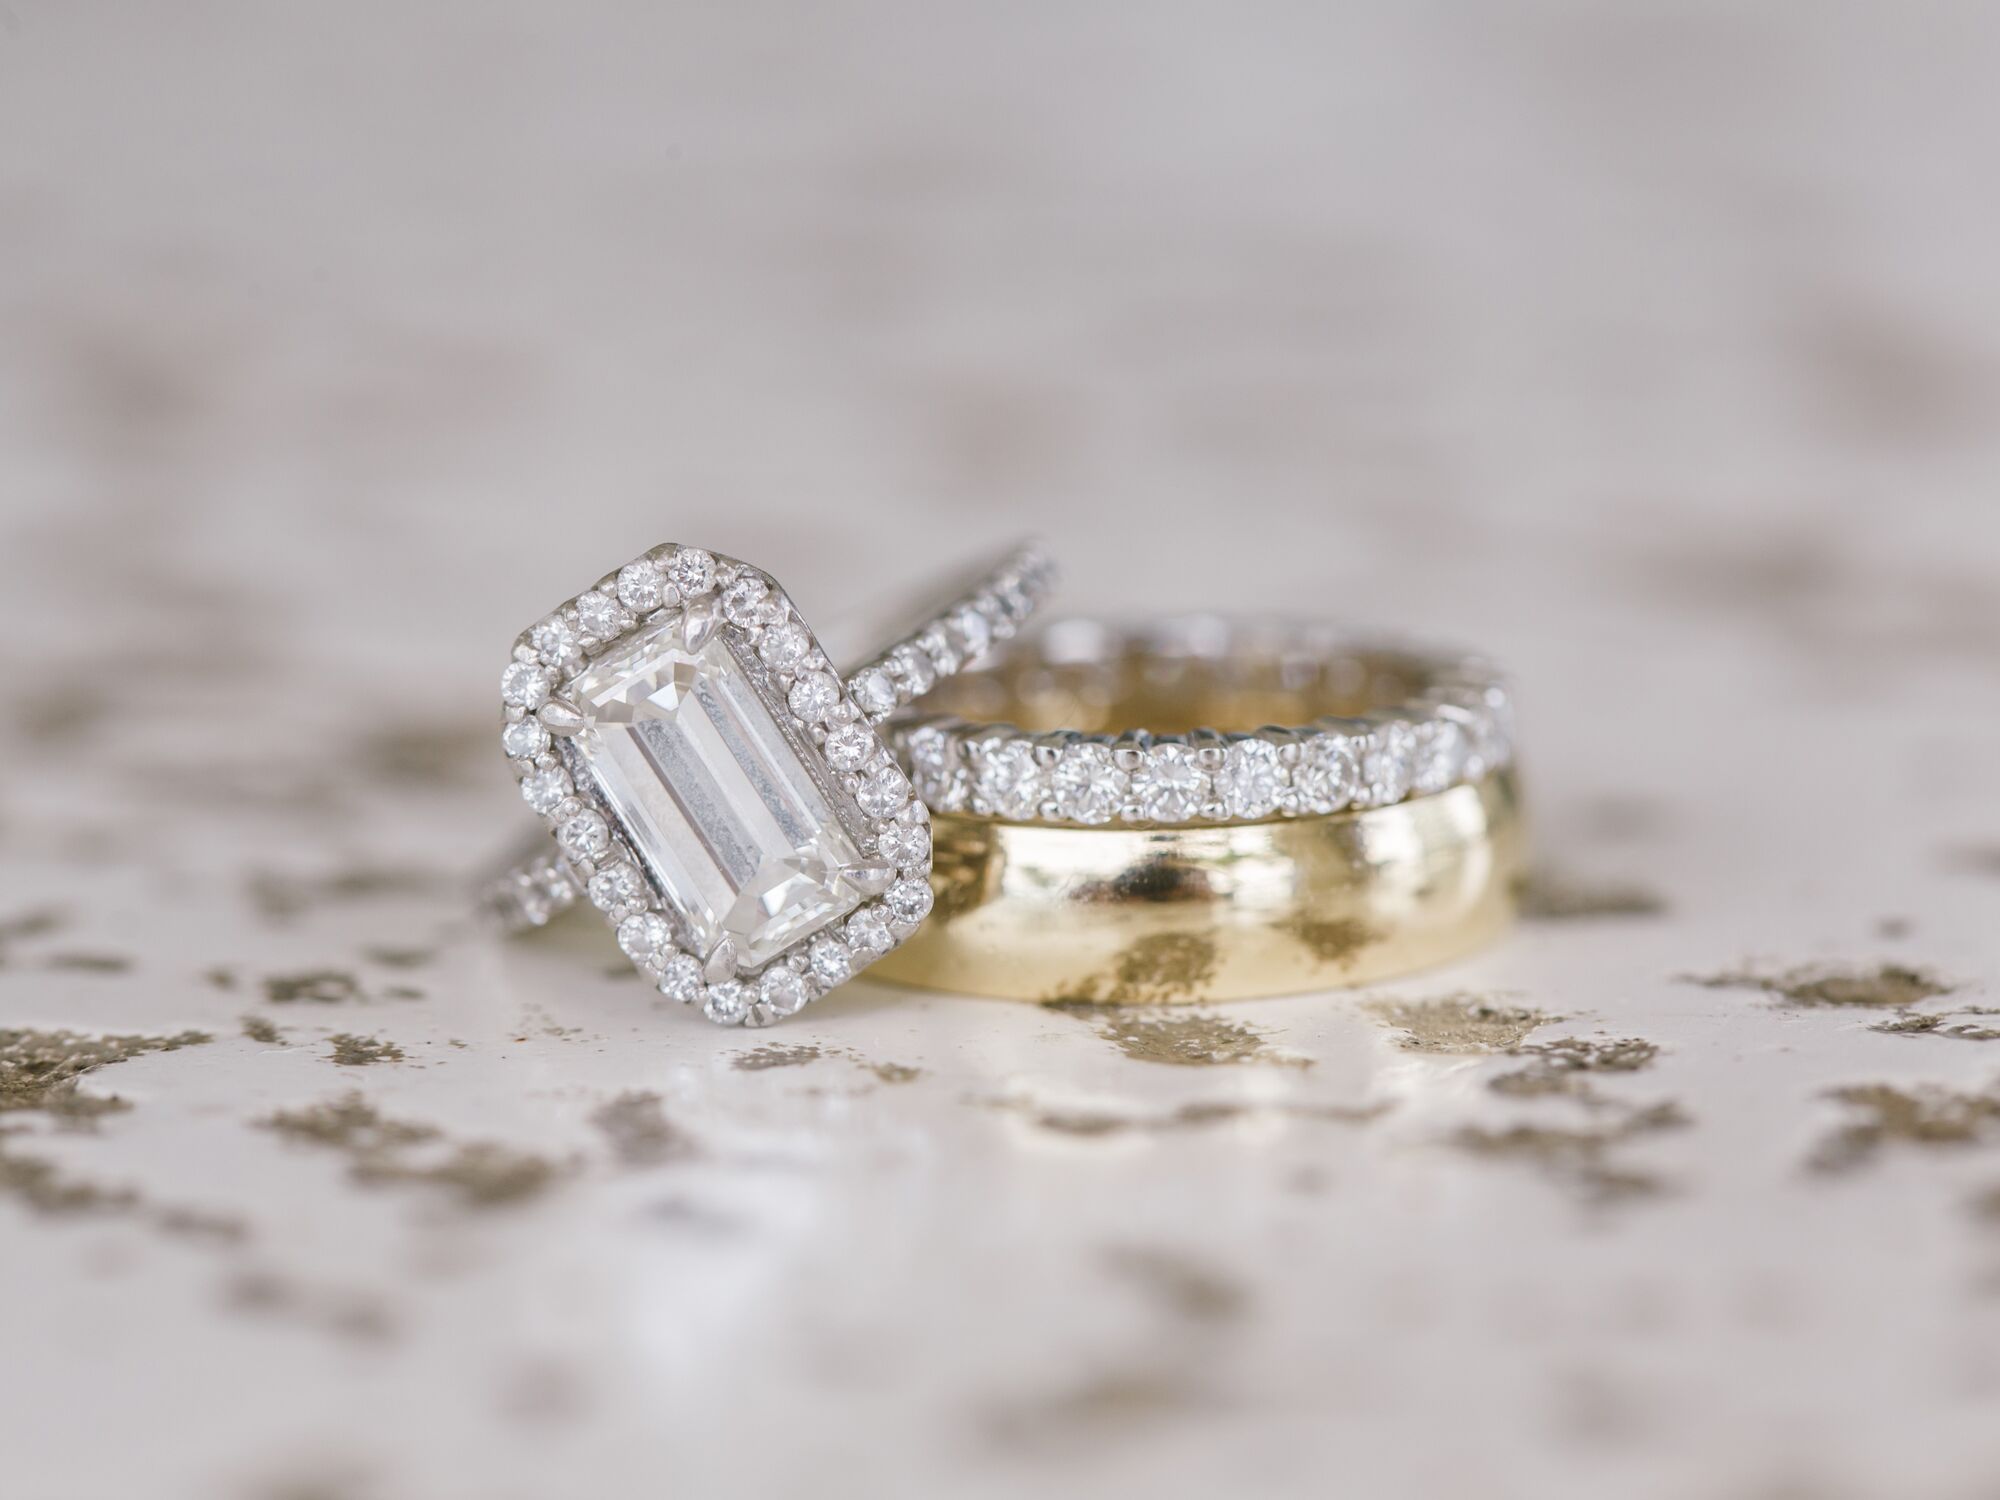 How Much To Spend On A Wedding Ring The Diamond Pro